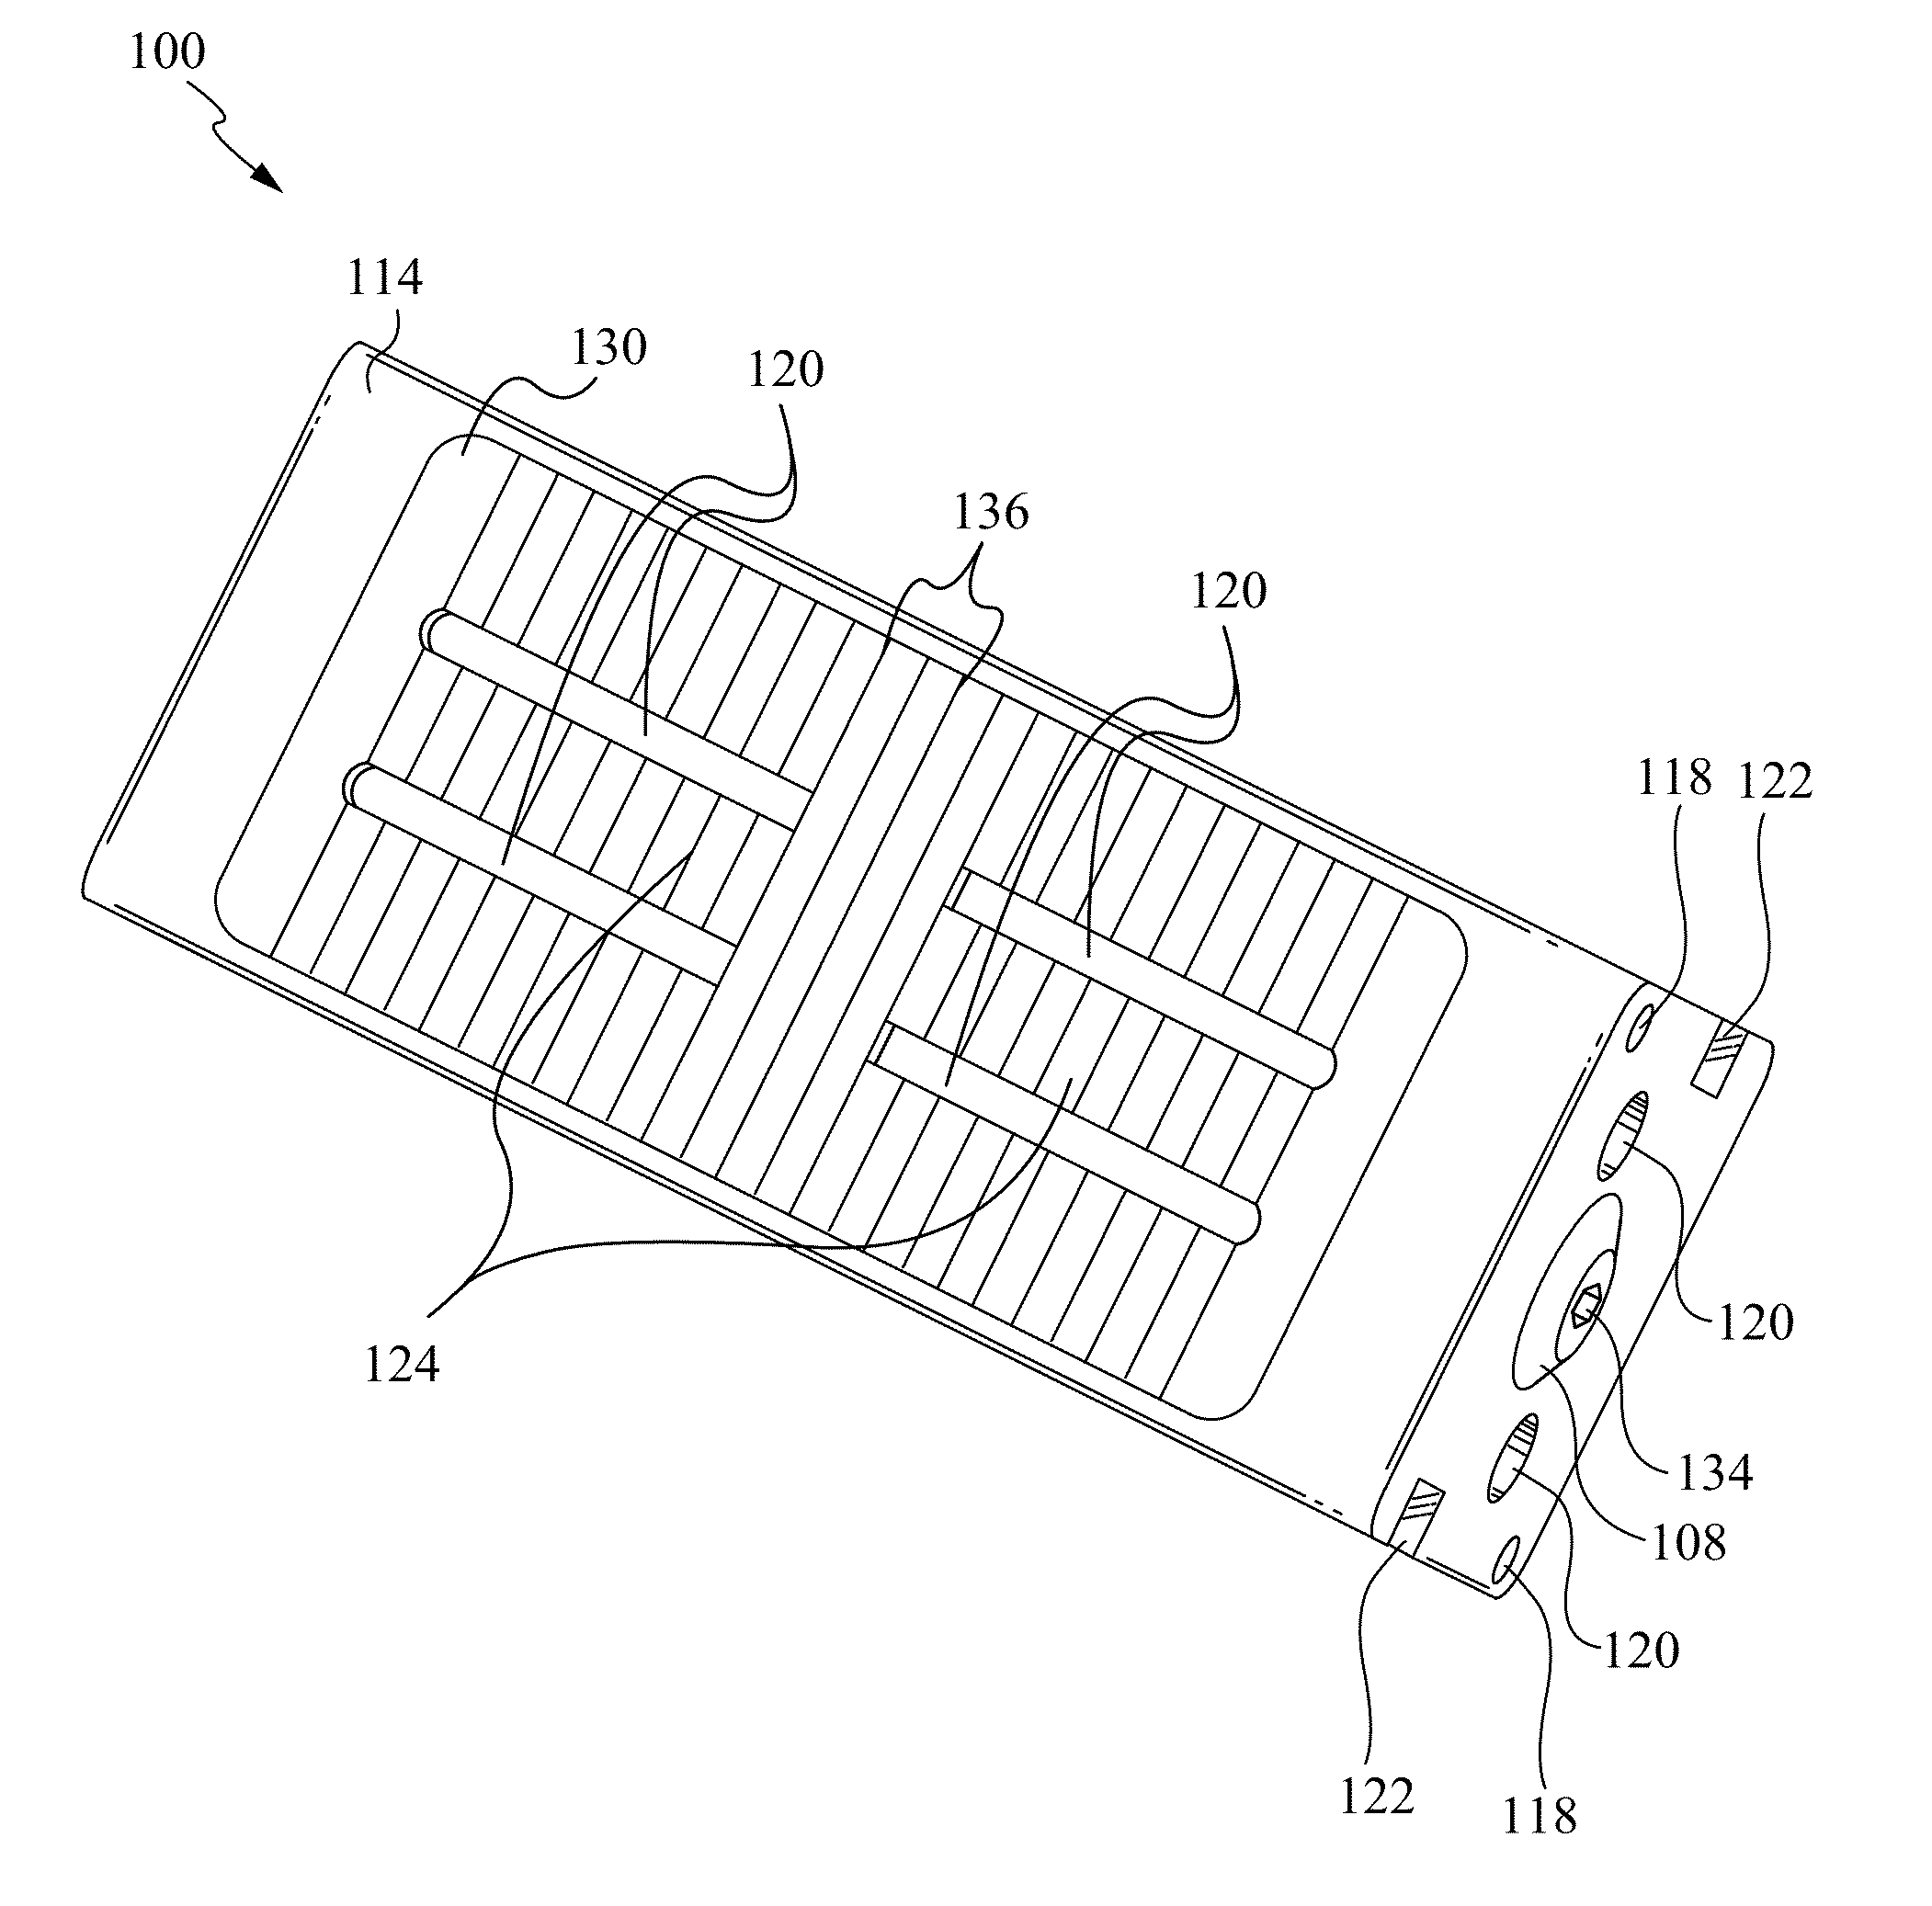 Bone fusion device, system and method